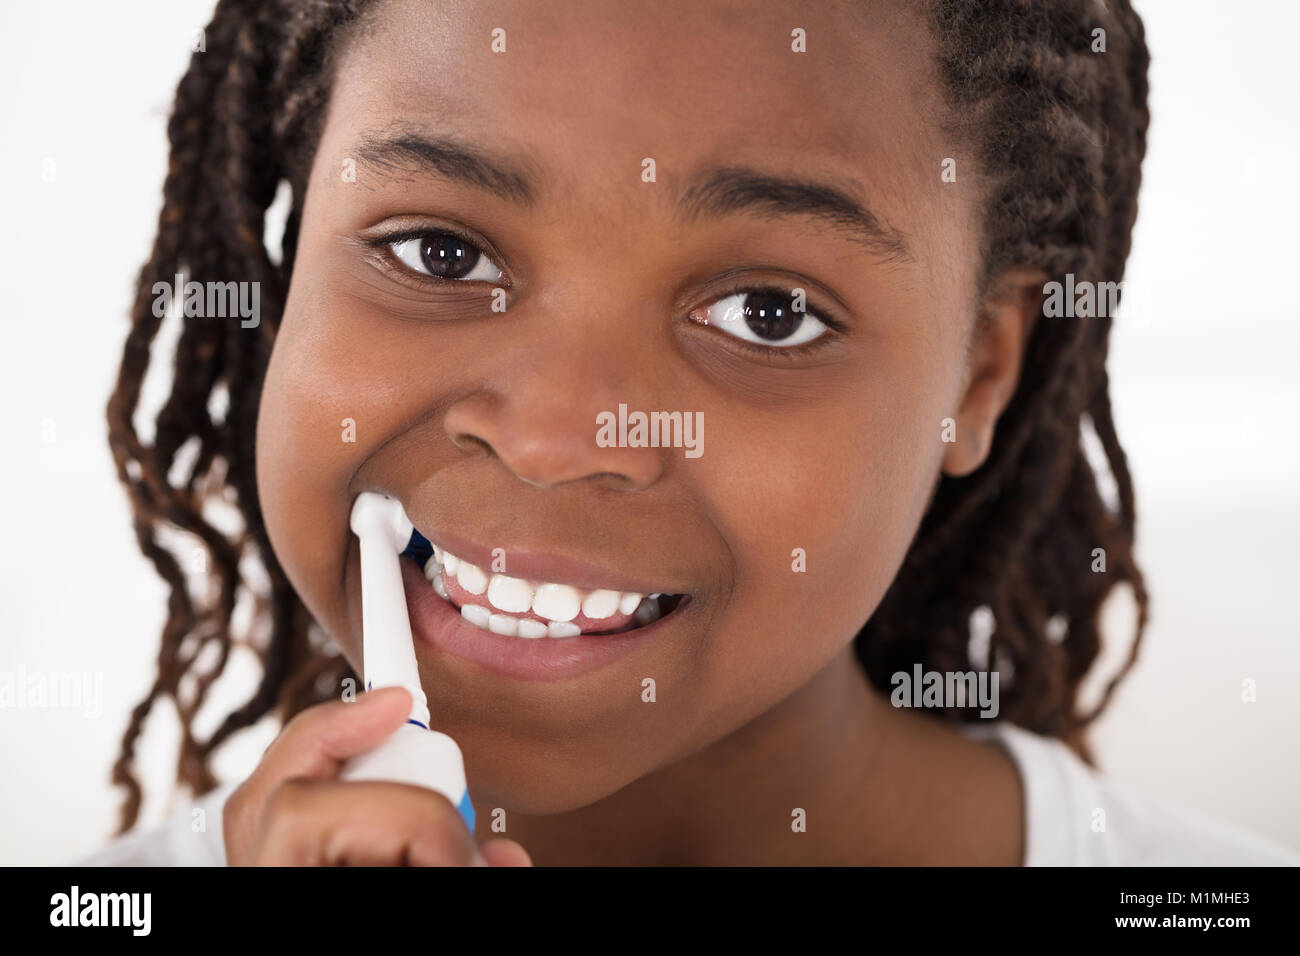 Portrait Of An African Girl Brushing Her Teeth Stock Photo